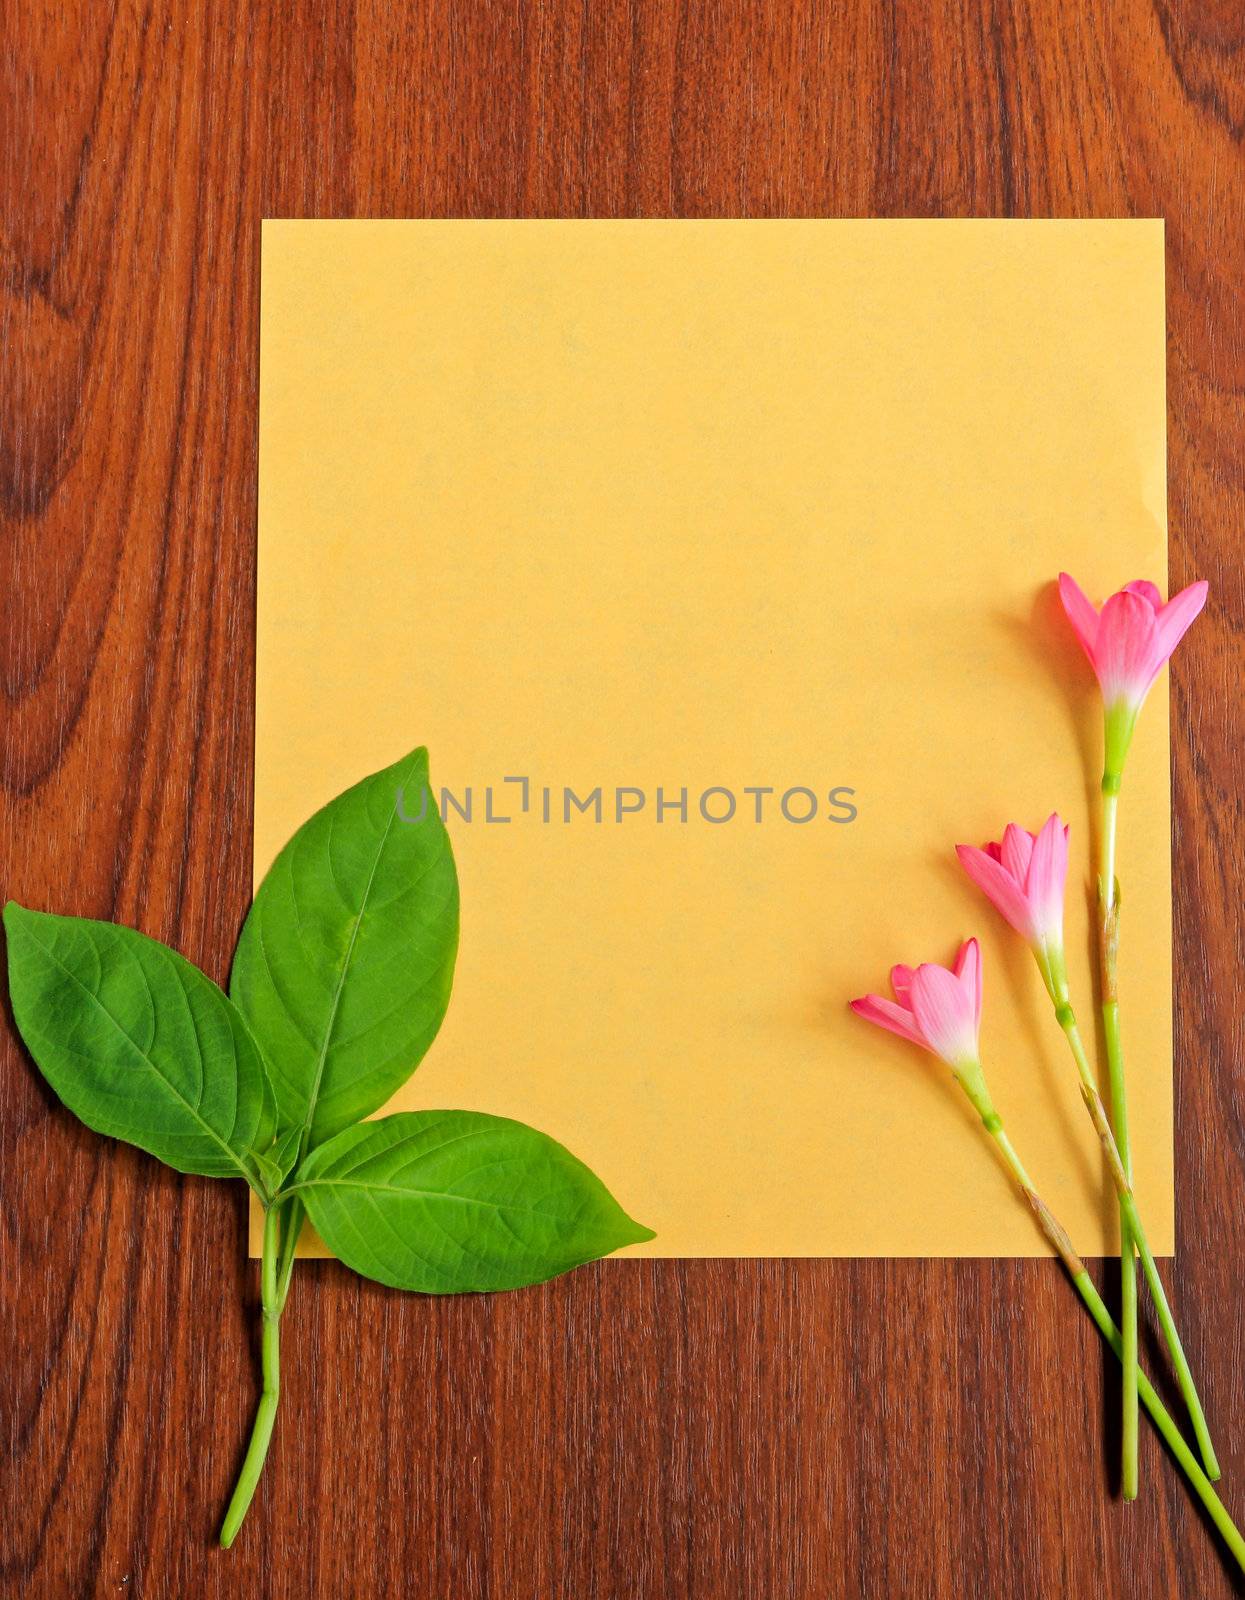 Flowers and leaves with yellow paper on wooden background